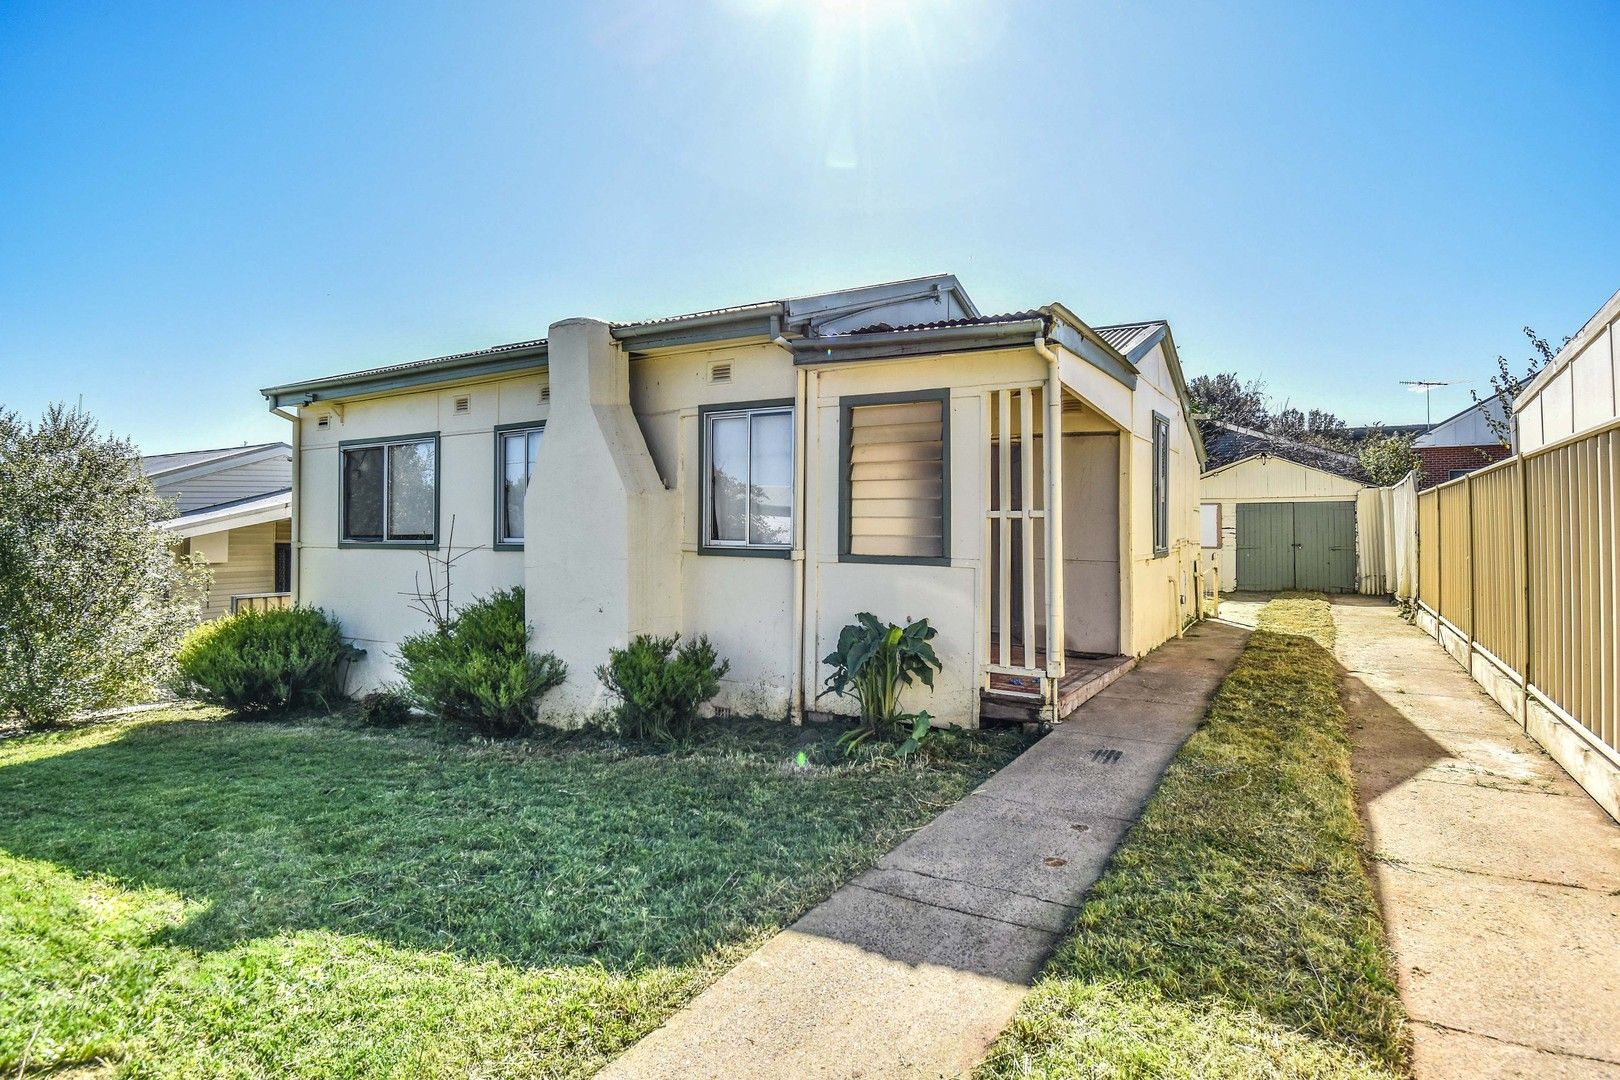 3 bedrooms House in 27 Moresby Street ORANGE NSW, 2800